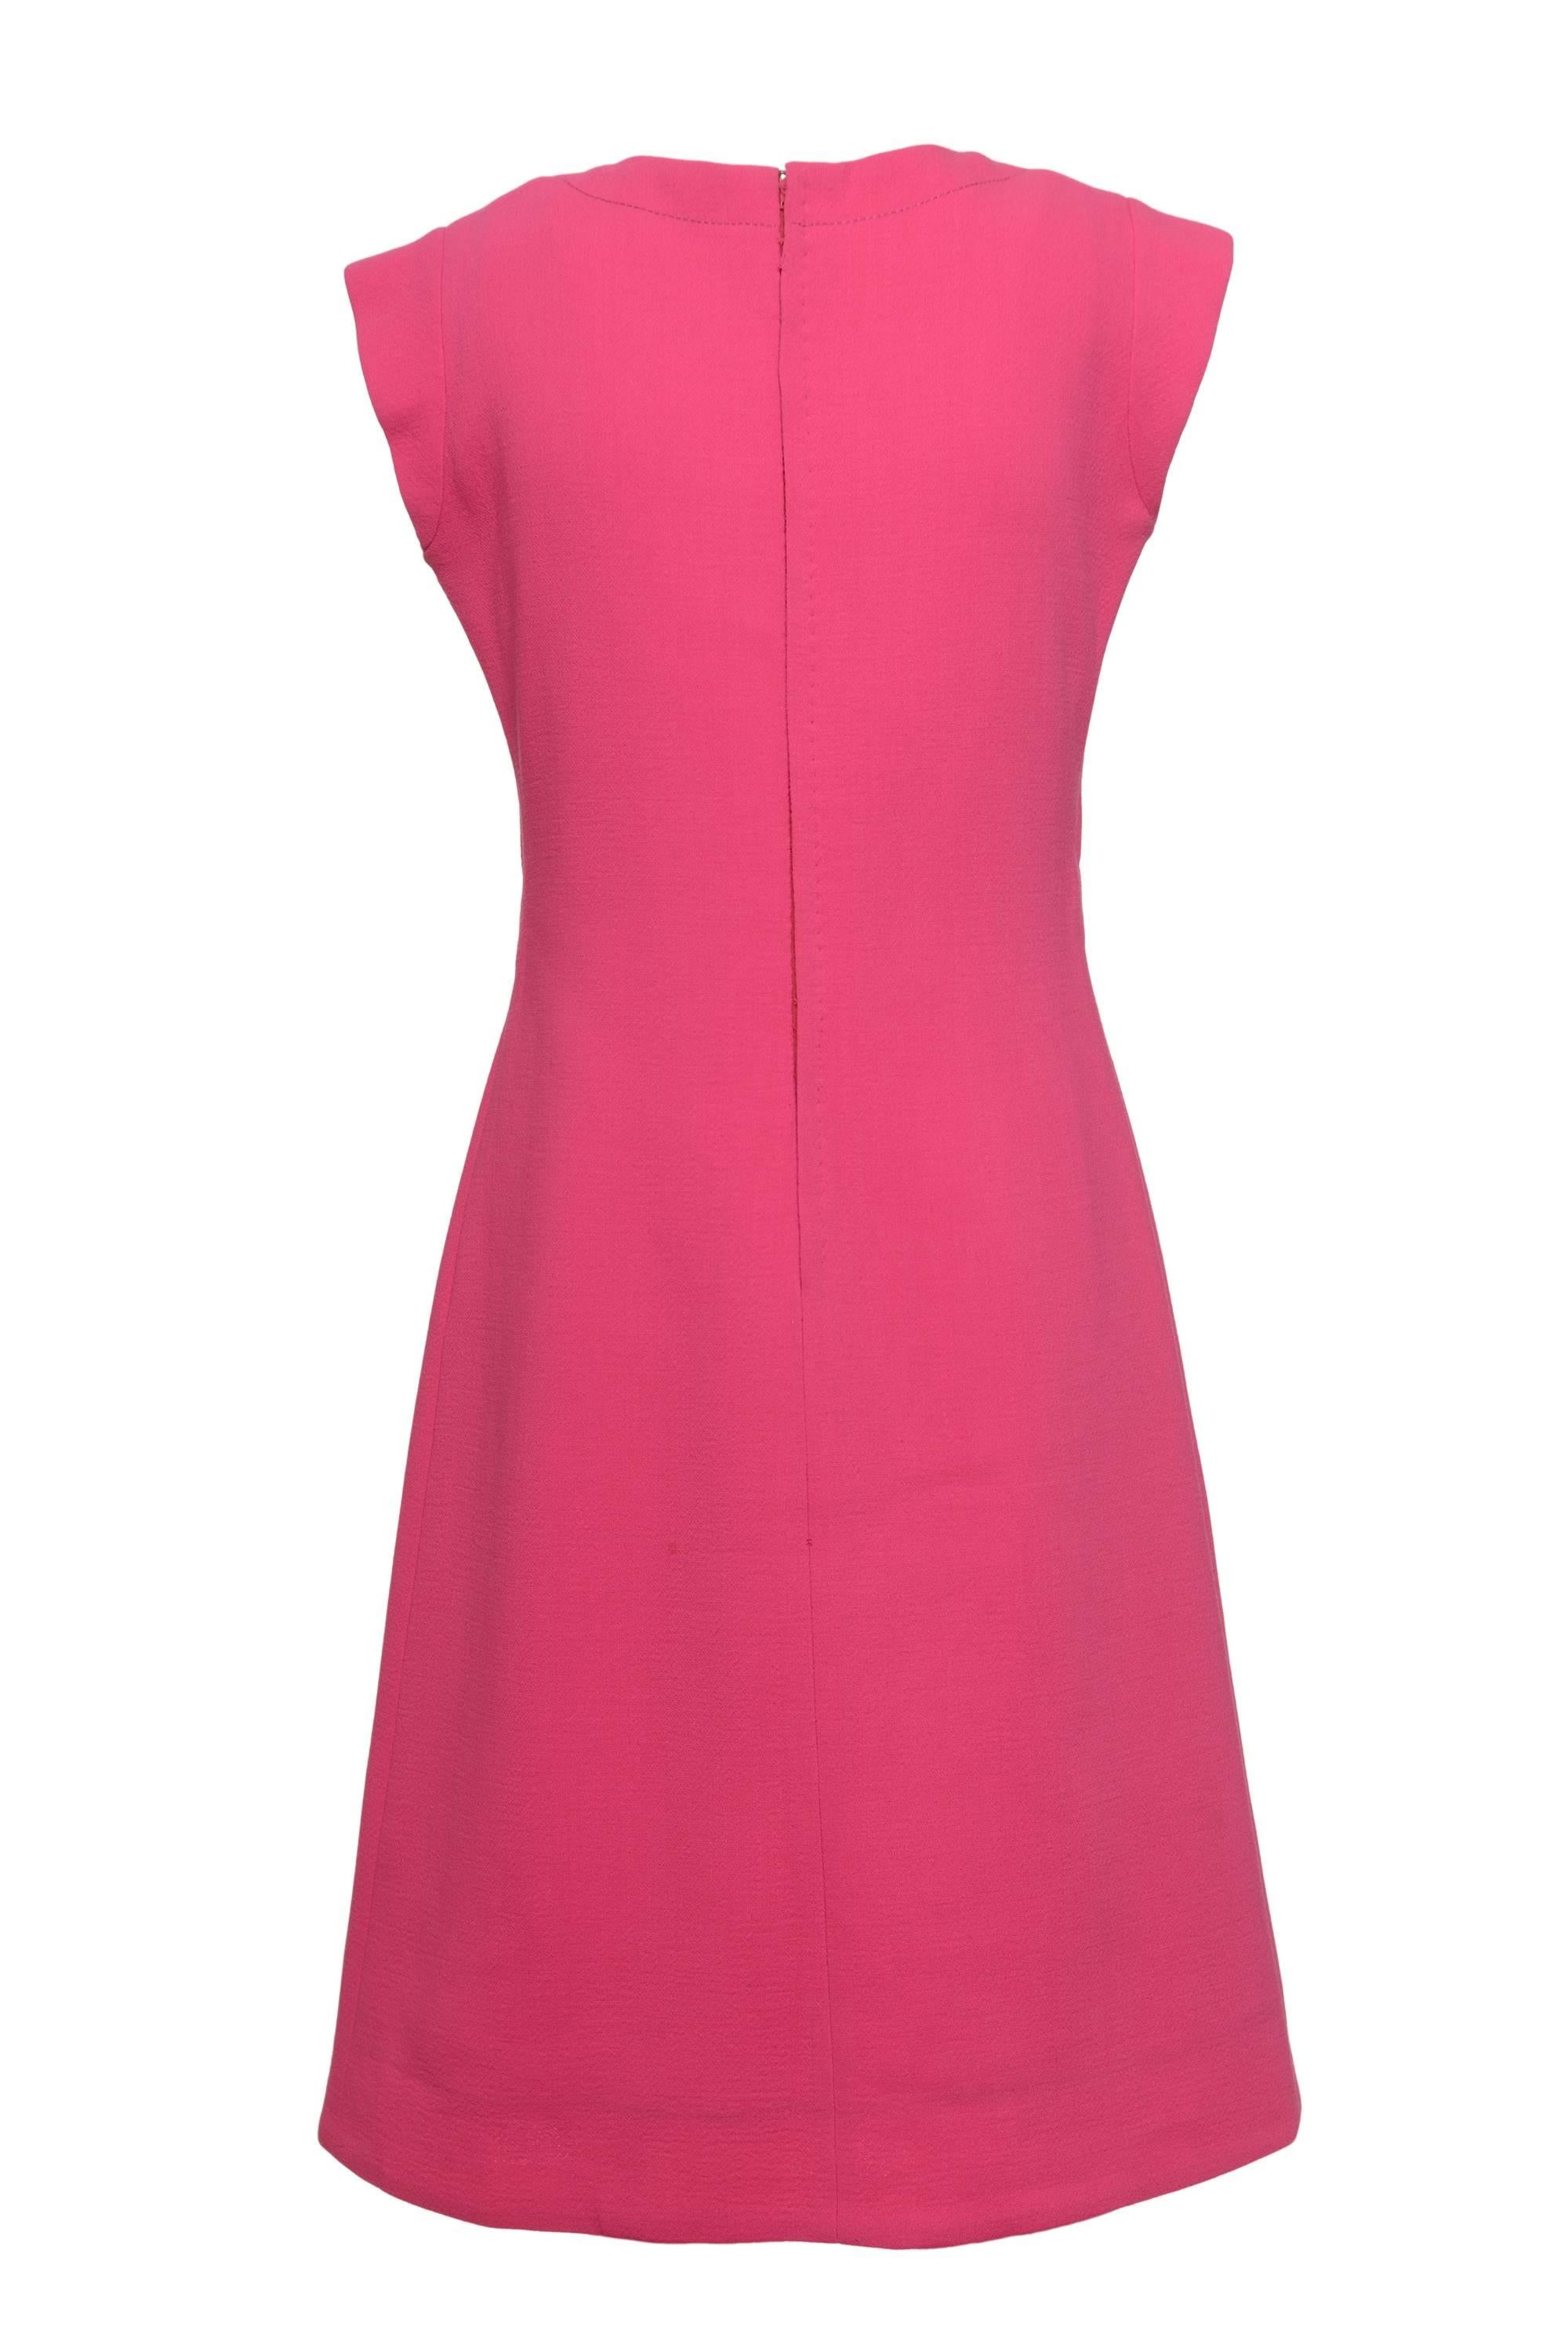 This gorgeous 1960s PIERRE CARDIN Mod dress is in shocking pink woolen fabric. It has tie frontal closure and back zip closure. It's fully satin lined.

Good Vintage Condition 

Label: Pierre Cardin Boutique Paris
Fabric: Wool 
Color: Shocking